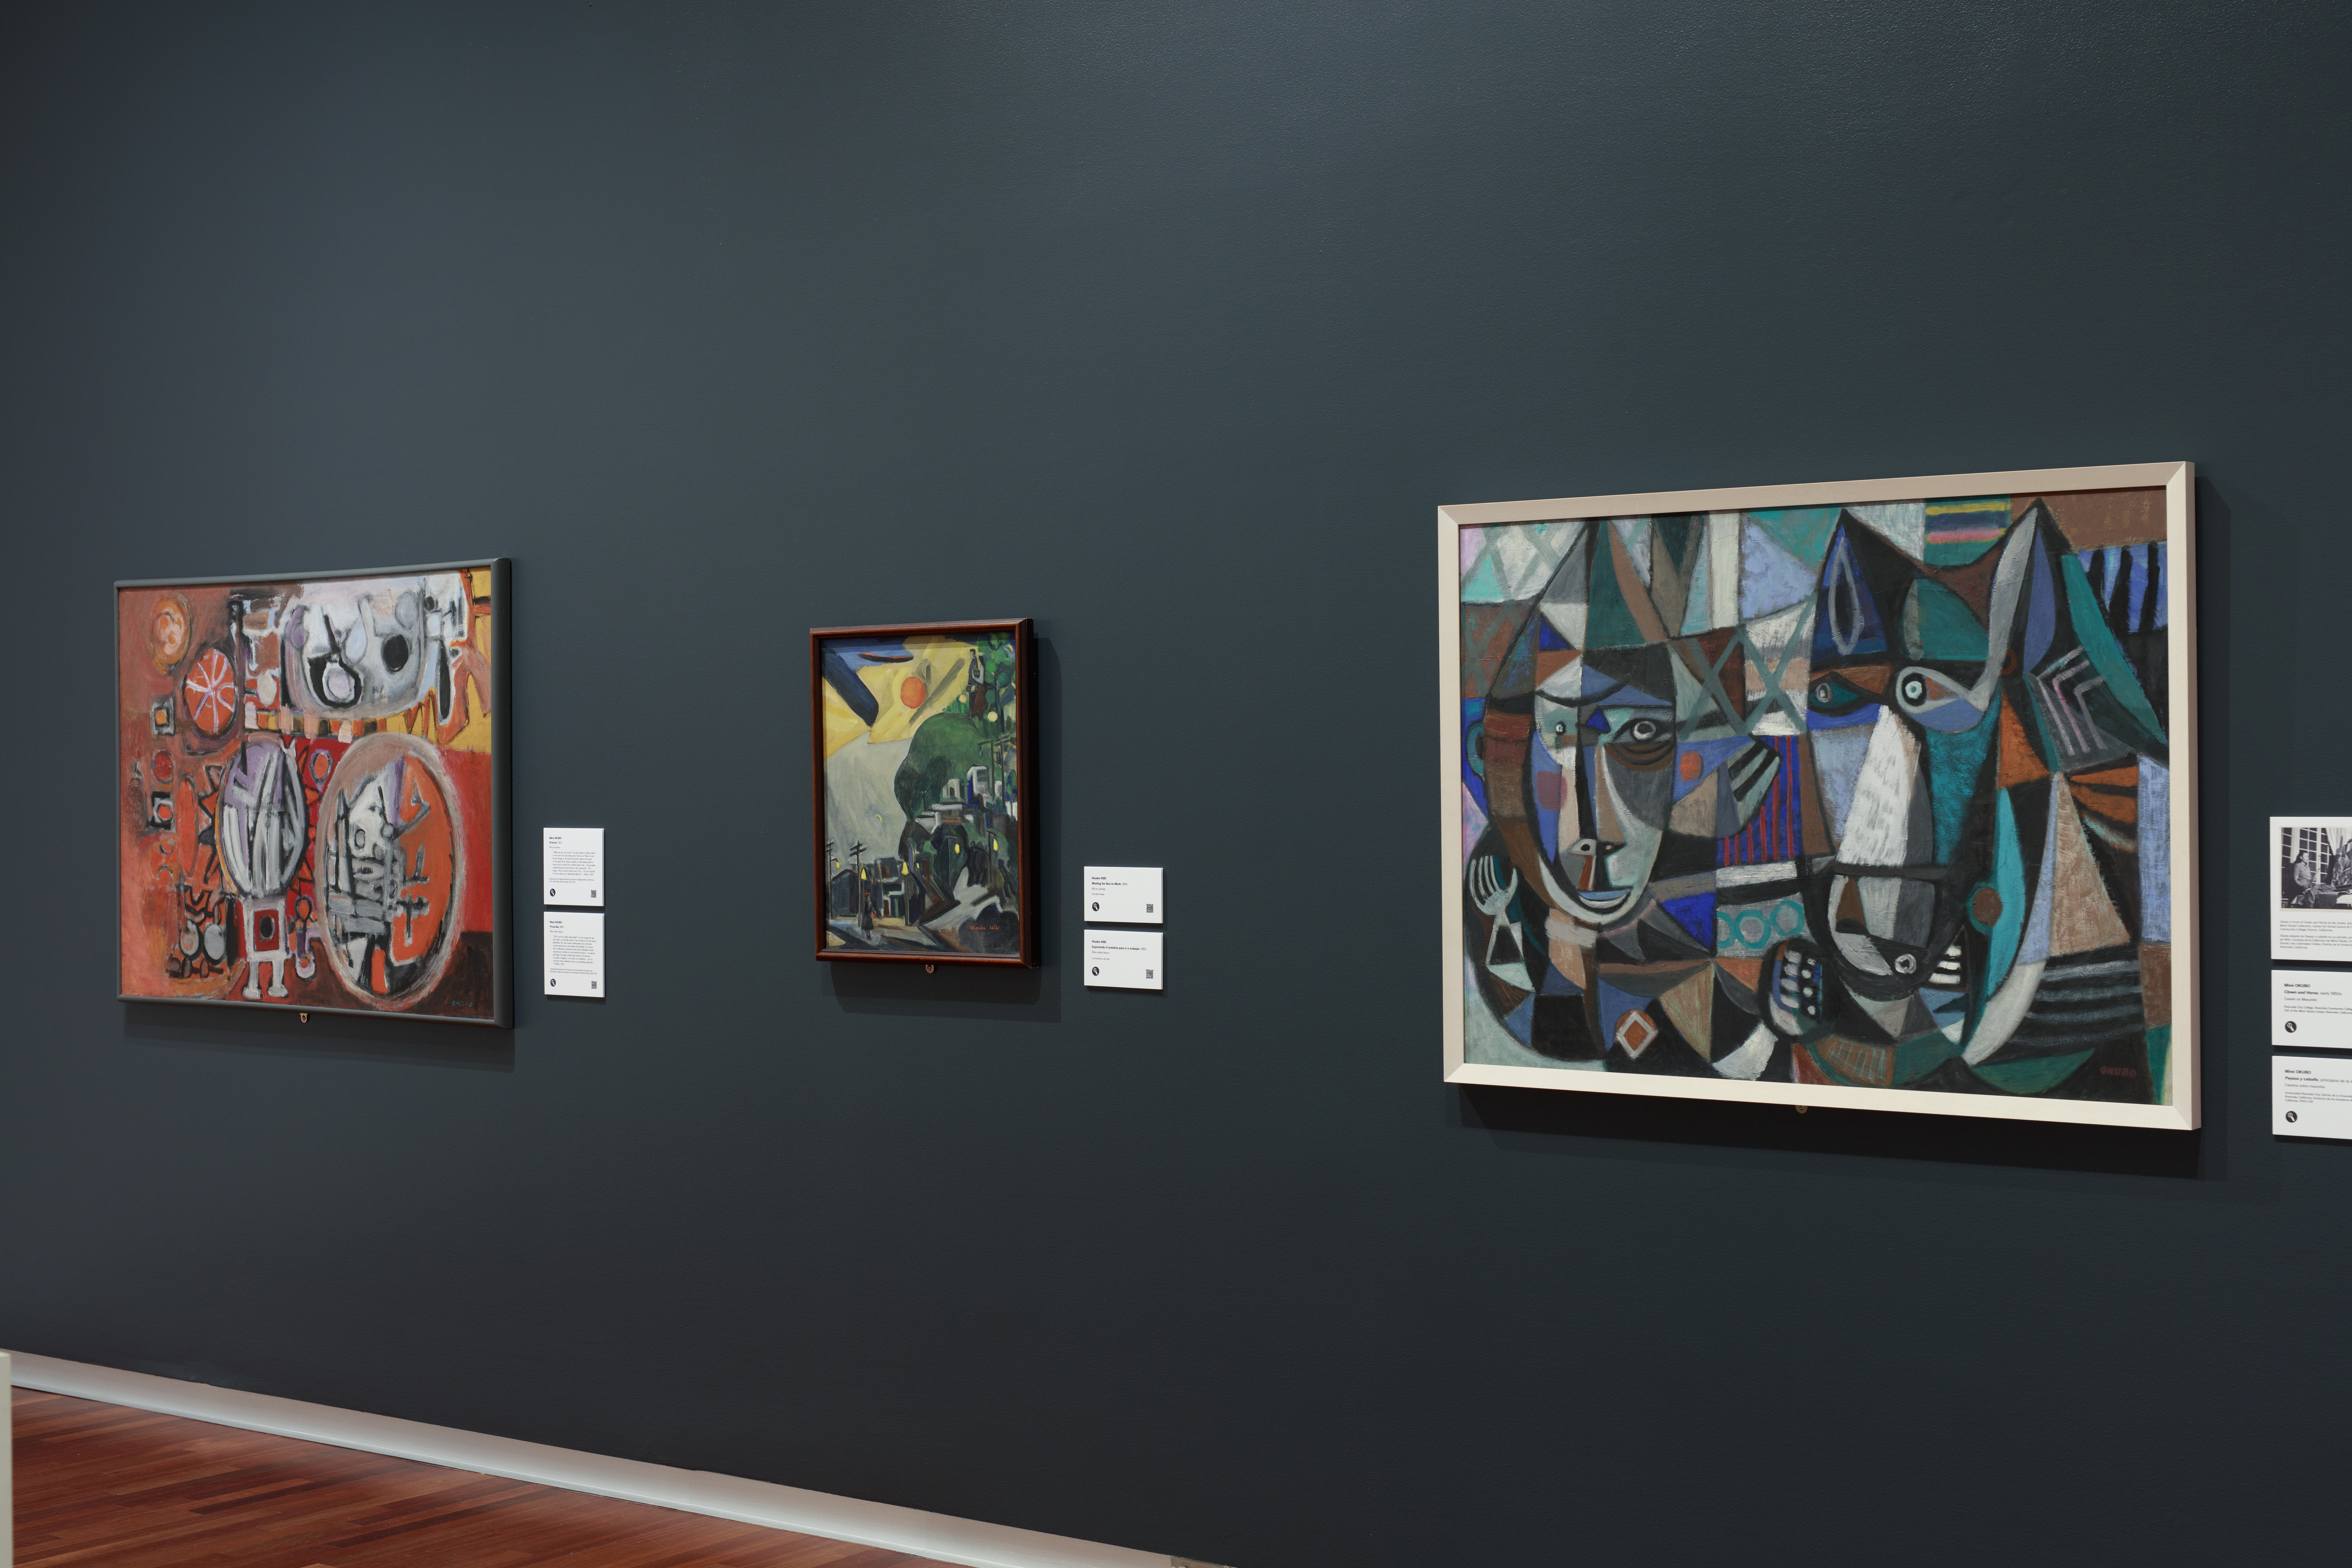 Gallery view of "Pictures of Belonging". Three paintings hang on the wall. A painting of a horse and a clown in blue, green, and orange is on the right.